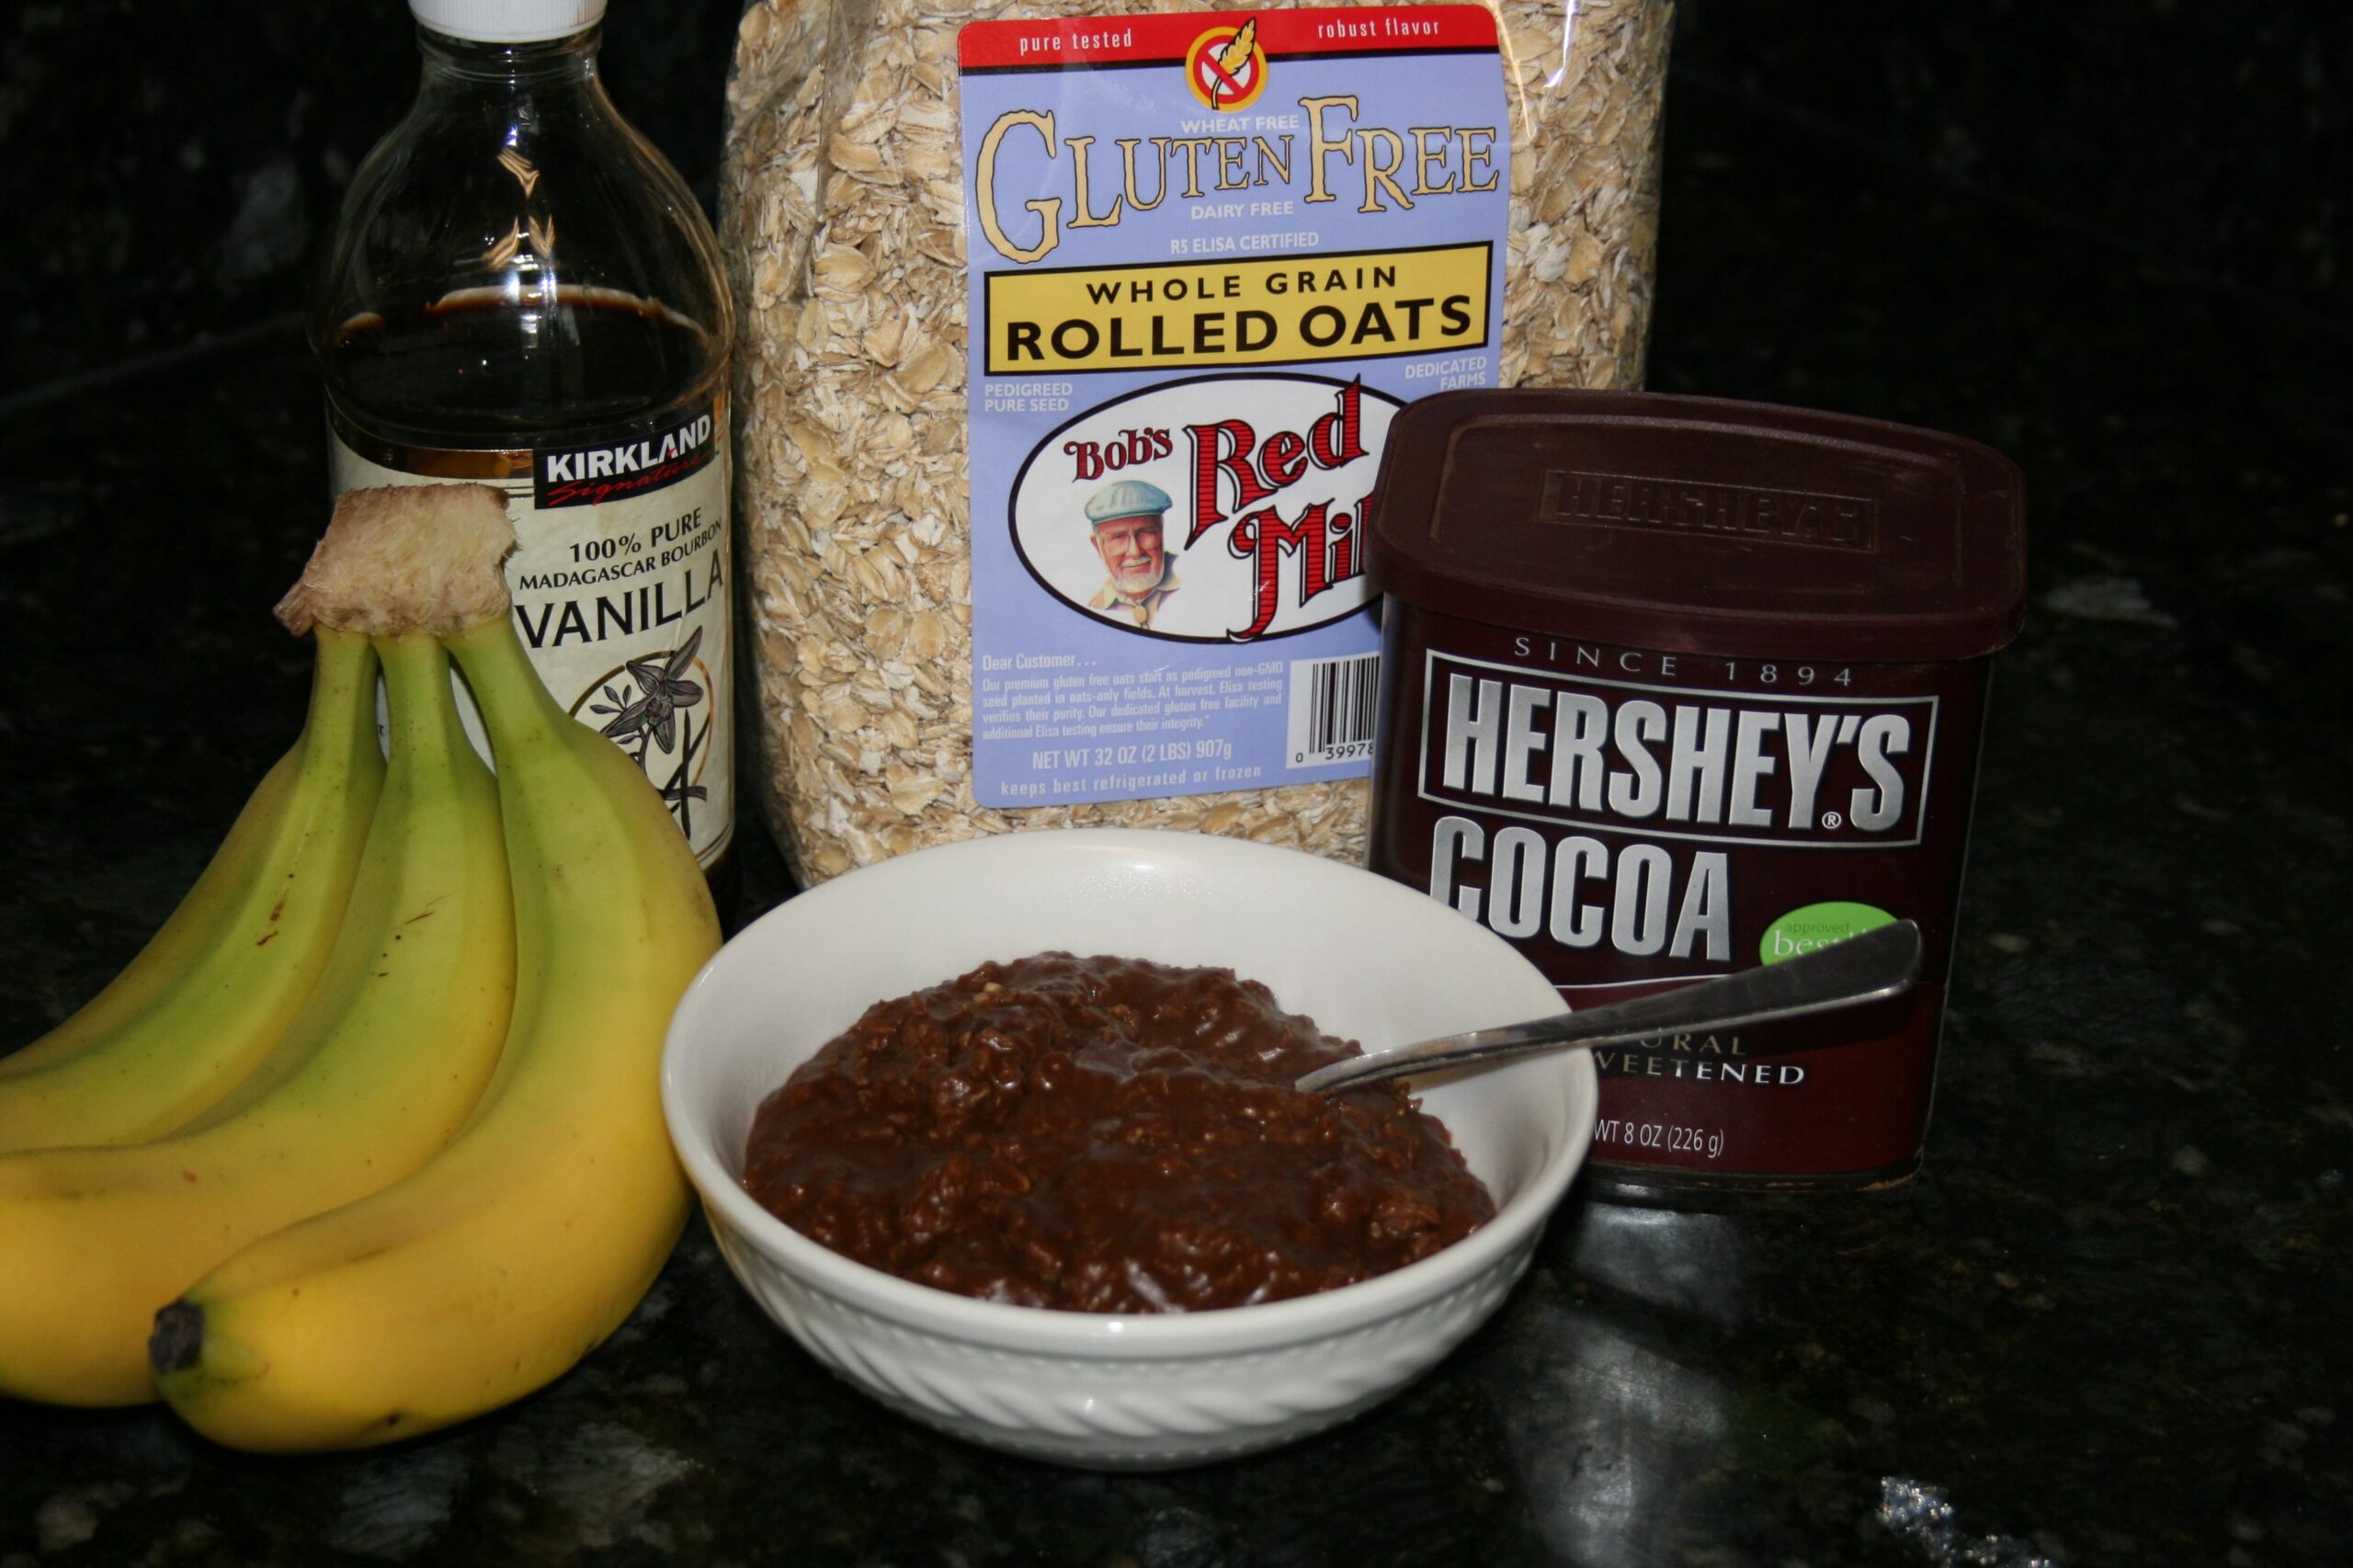  Who says oatmeal has to be boring? Jazz it up with some chocolate and bananas!